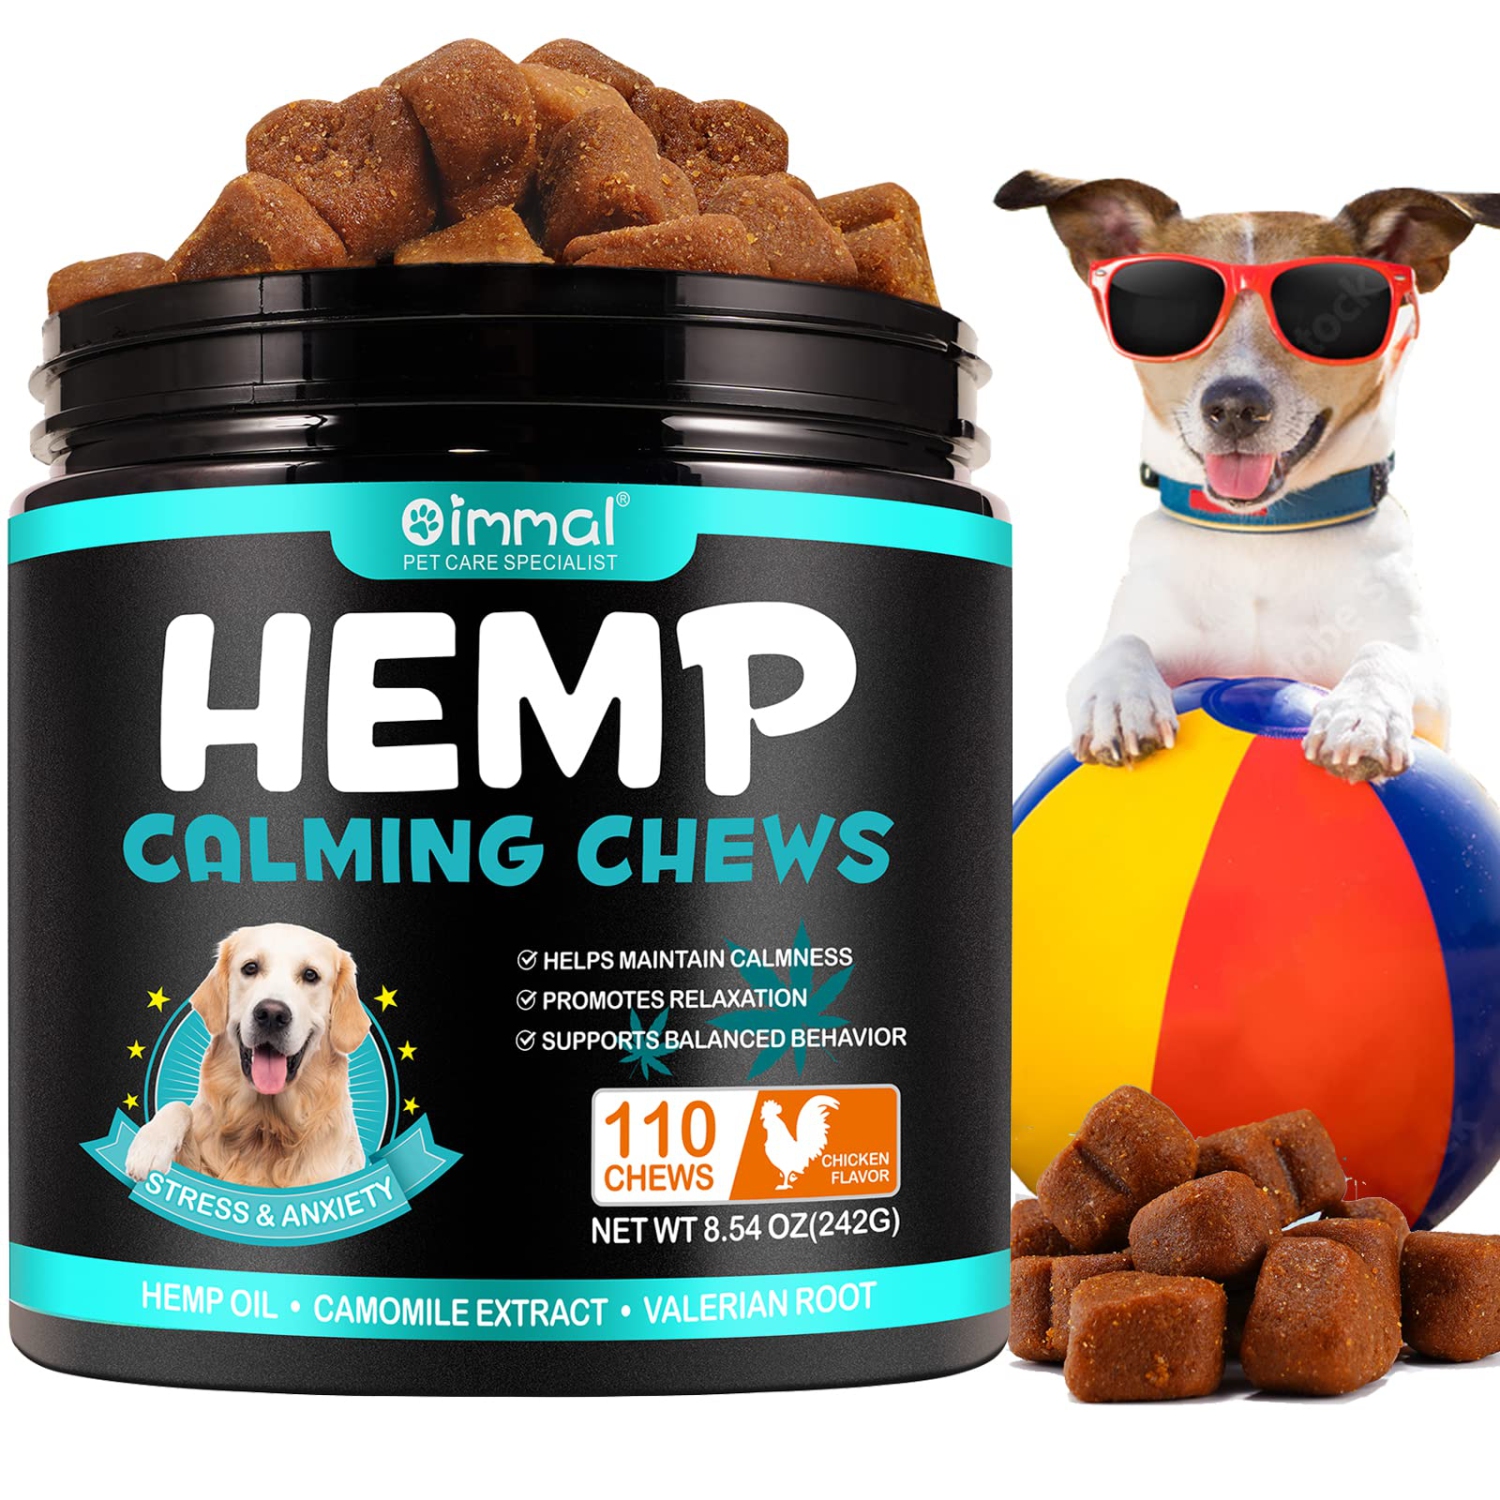 Hemp Calming Treats for Dogs - 110PCS, Chicken Flavor, Advanced Anxiety Relief, Travel & Separation Stress Relief Chews